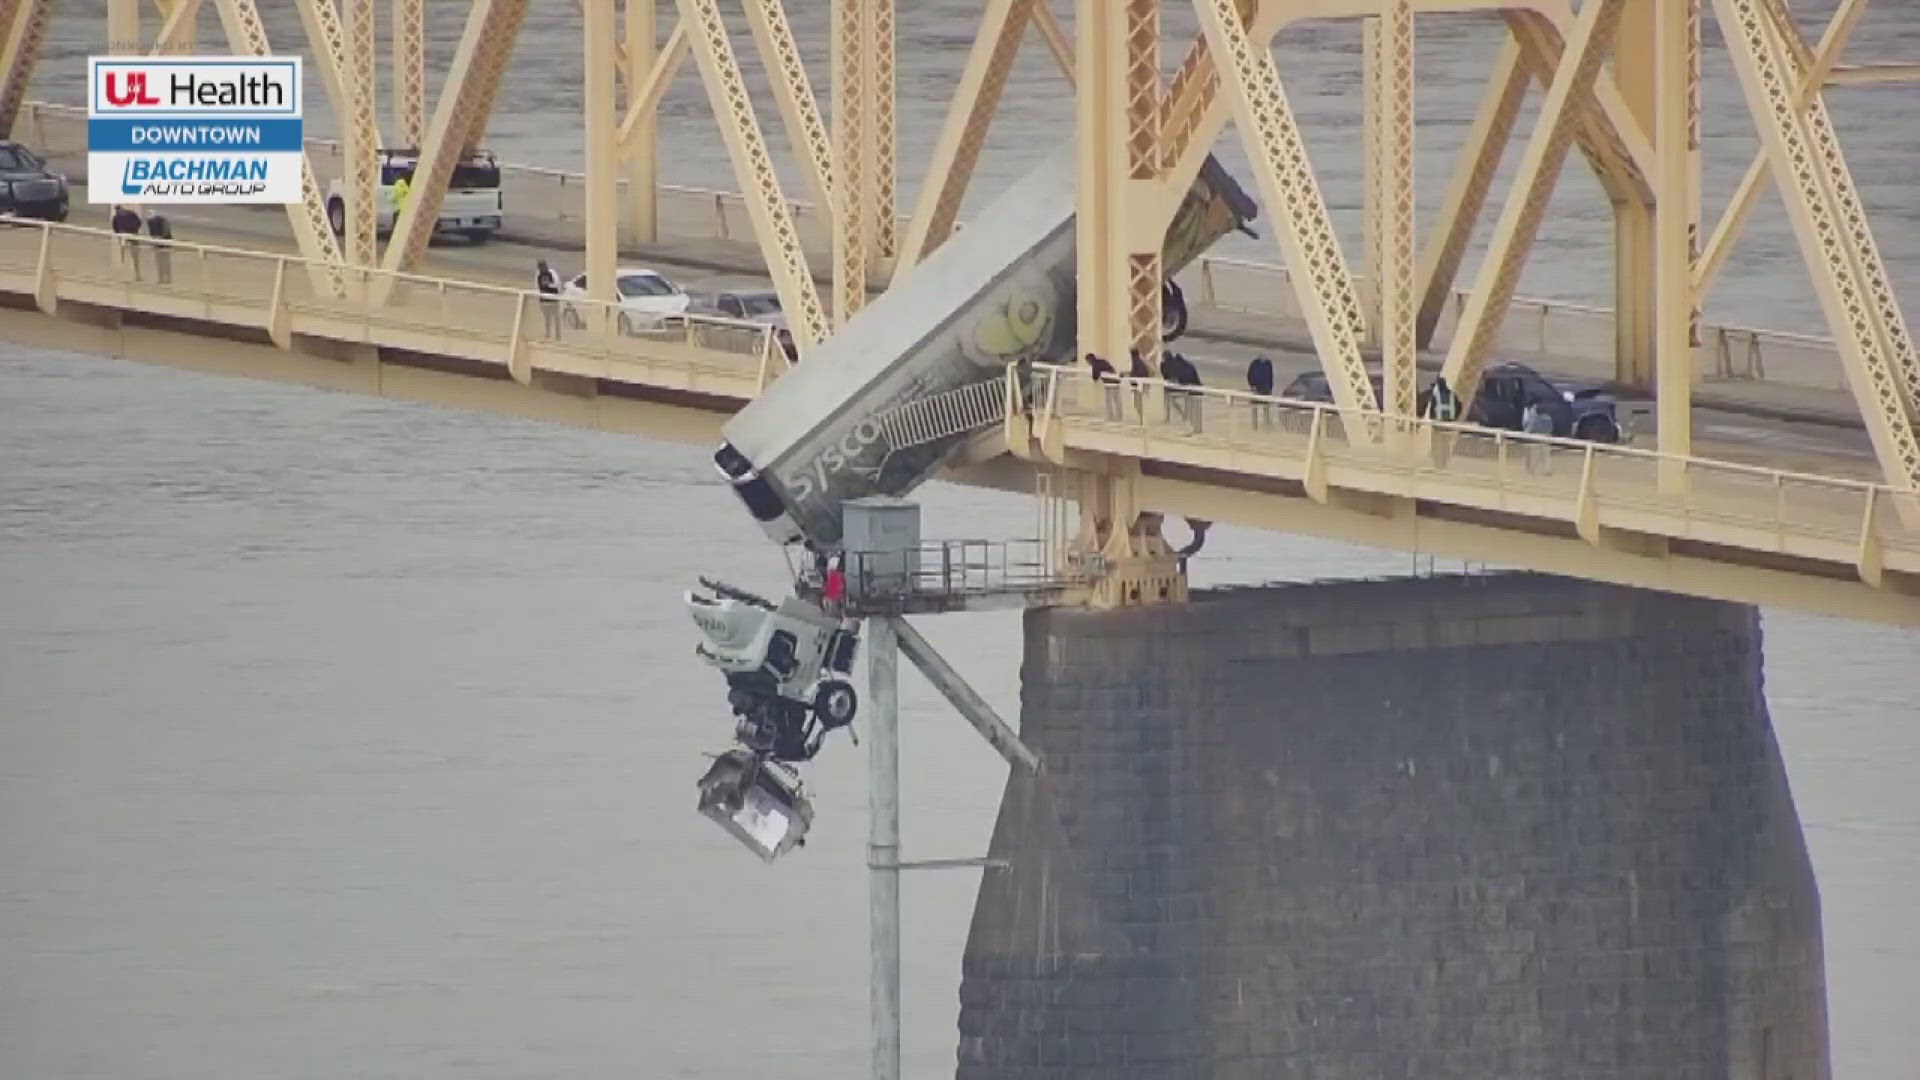 Dashcam footage obtained from WHAS in Louisville shows the moment a truck was sent dangling over the Clark Memorial Bridge.